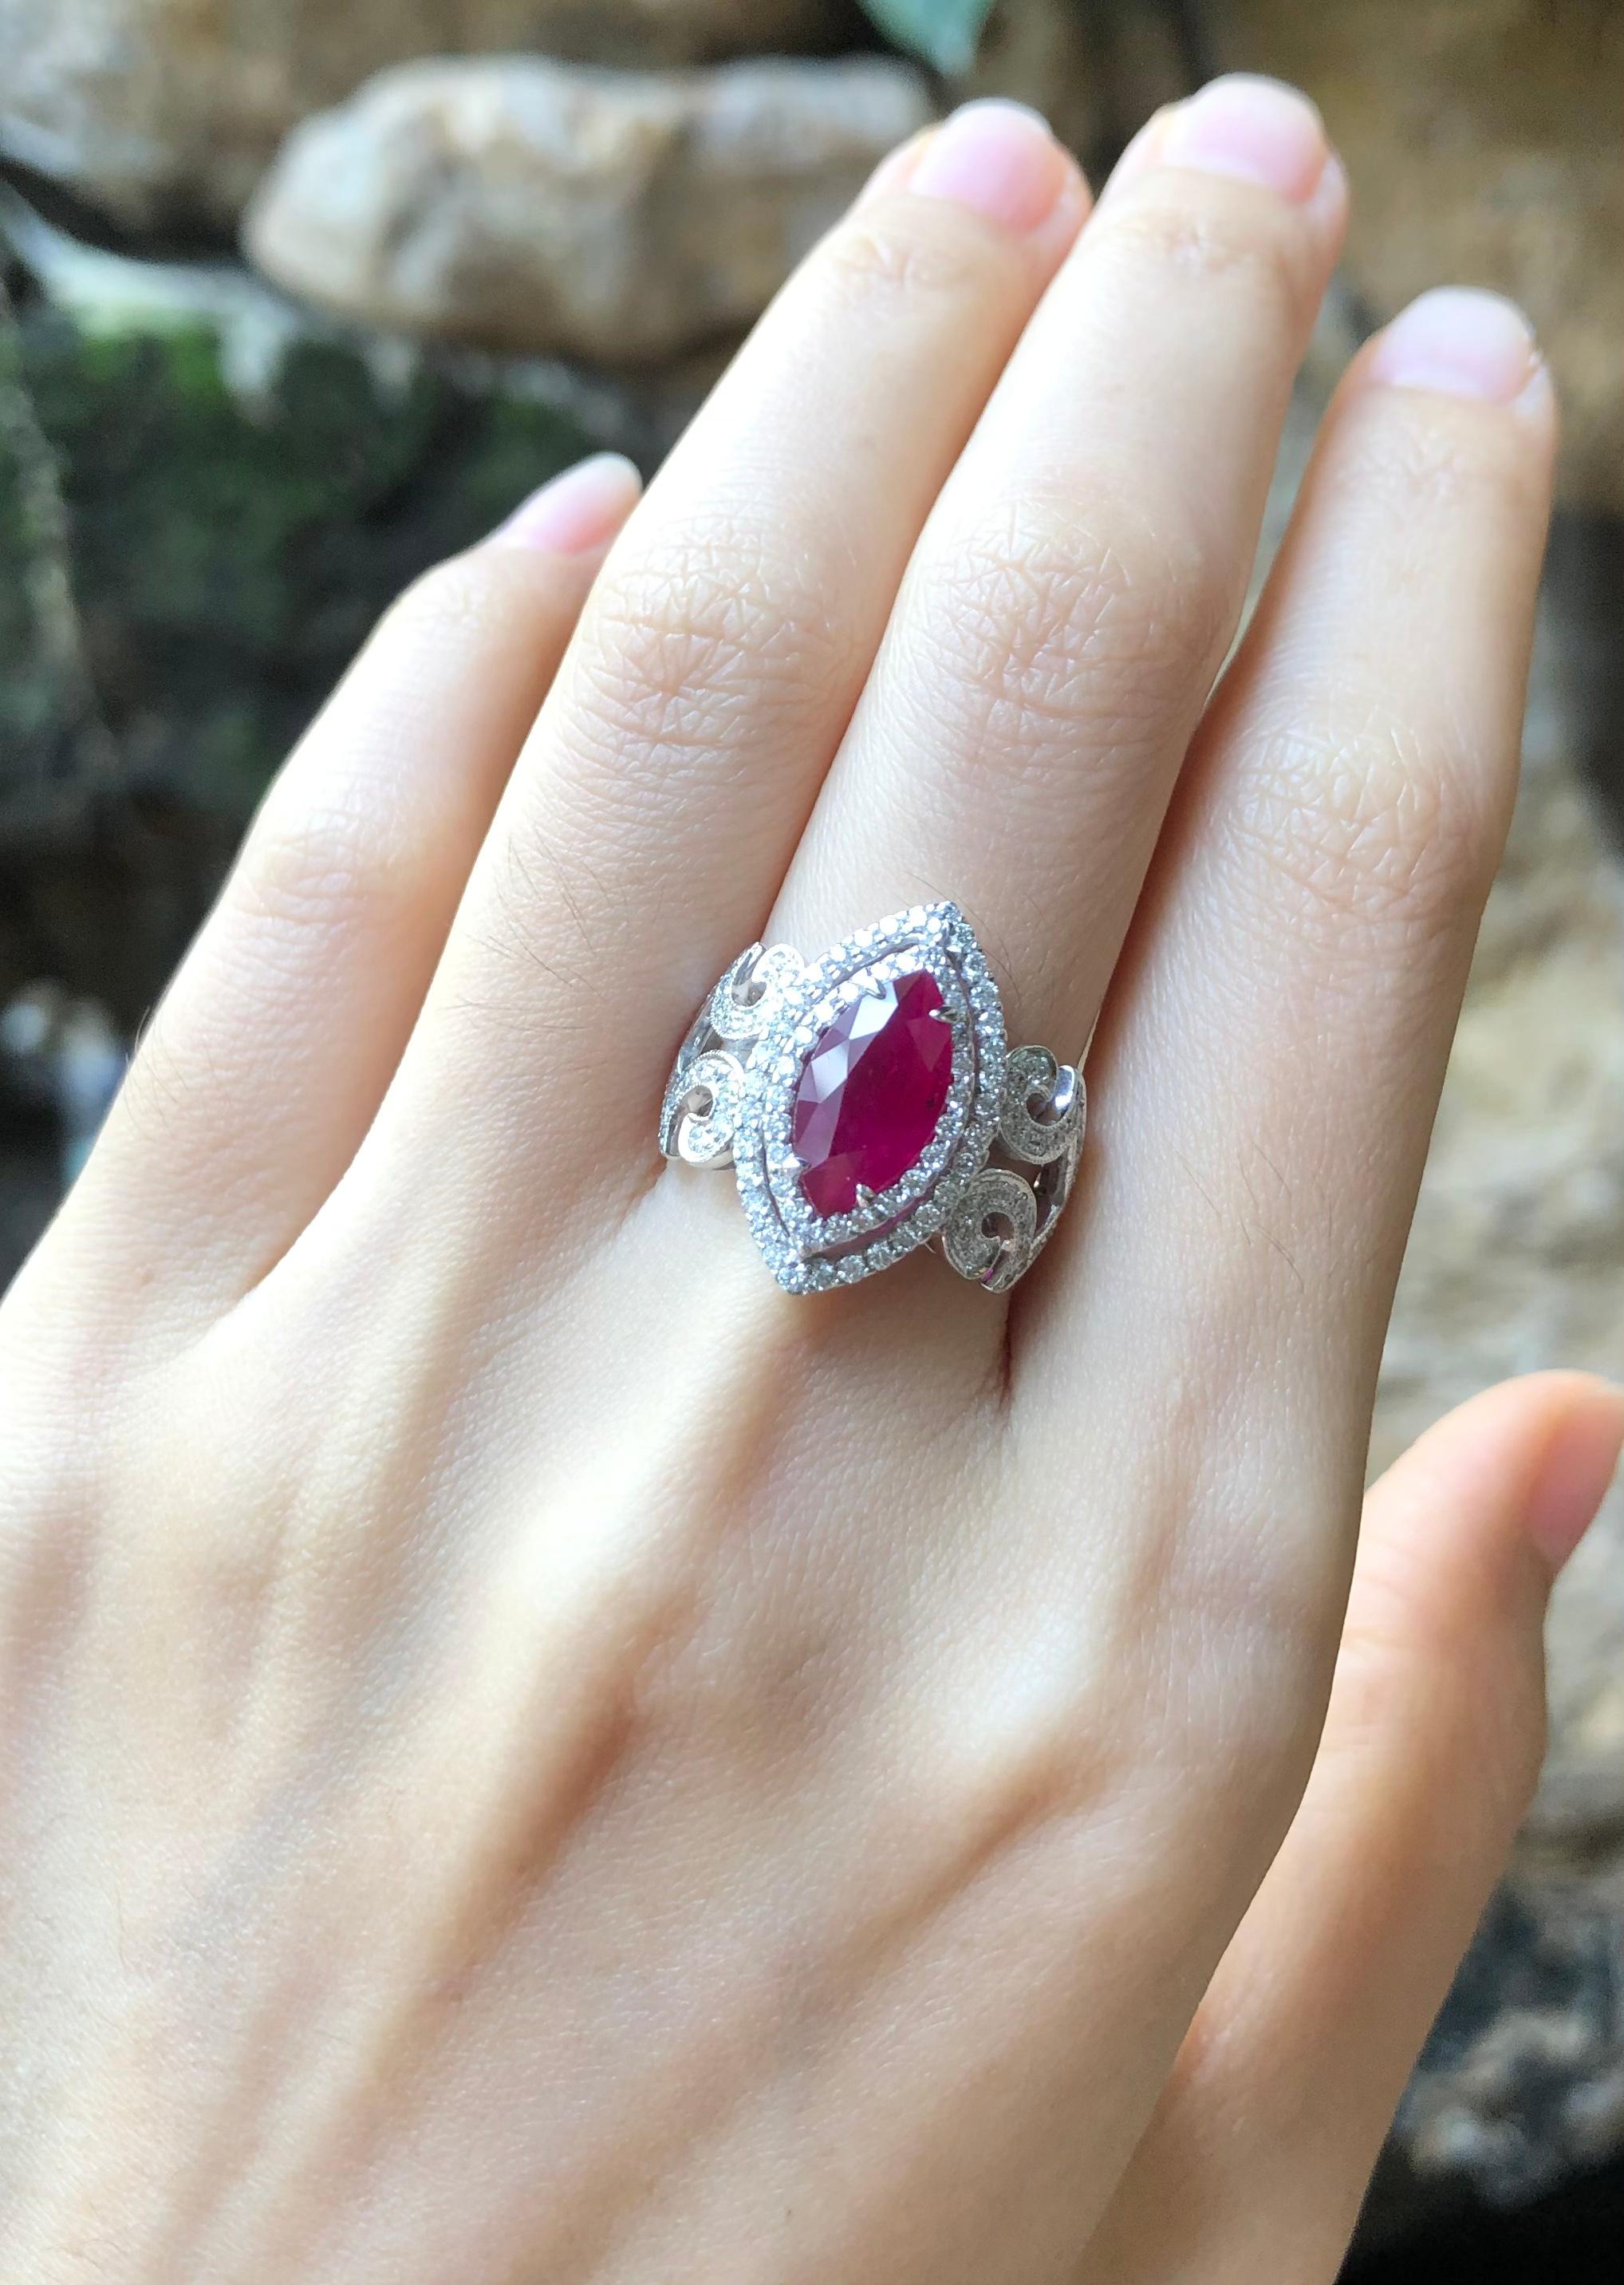 Ruby 2.14 carats with Diamond 0.75 carat Ring set in 18 Karat White Gold Settings

Width:  1.3 cm 
Length:  1.9 cm
Ring Size: 52
Total Weight: 7.77 grams

